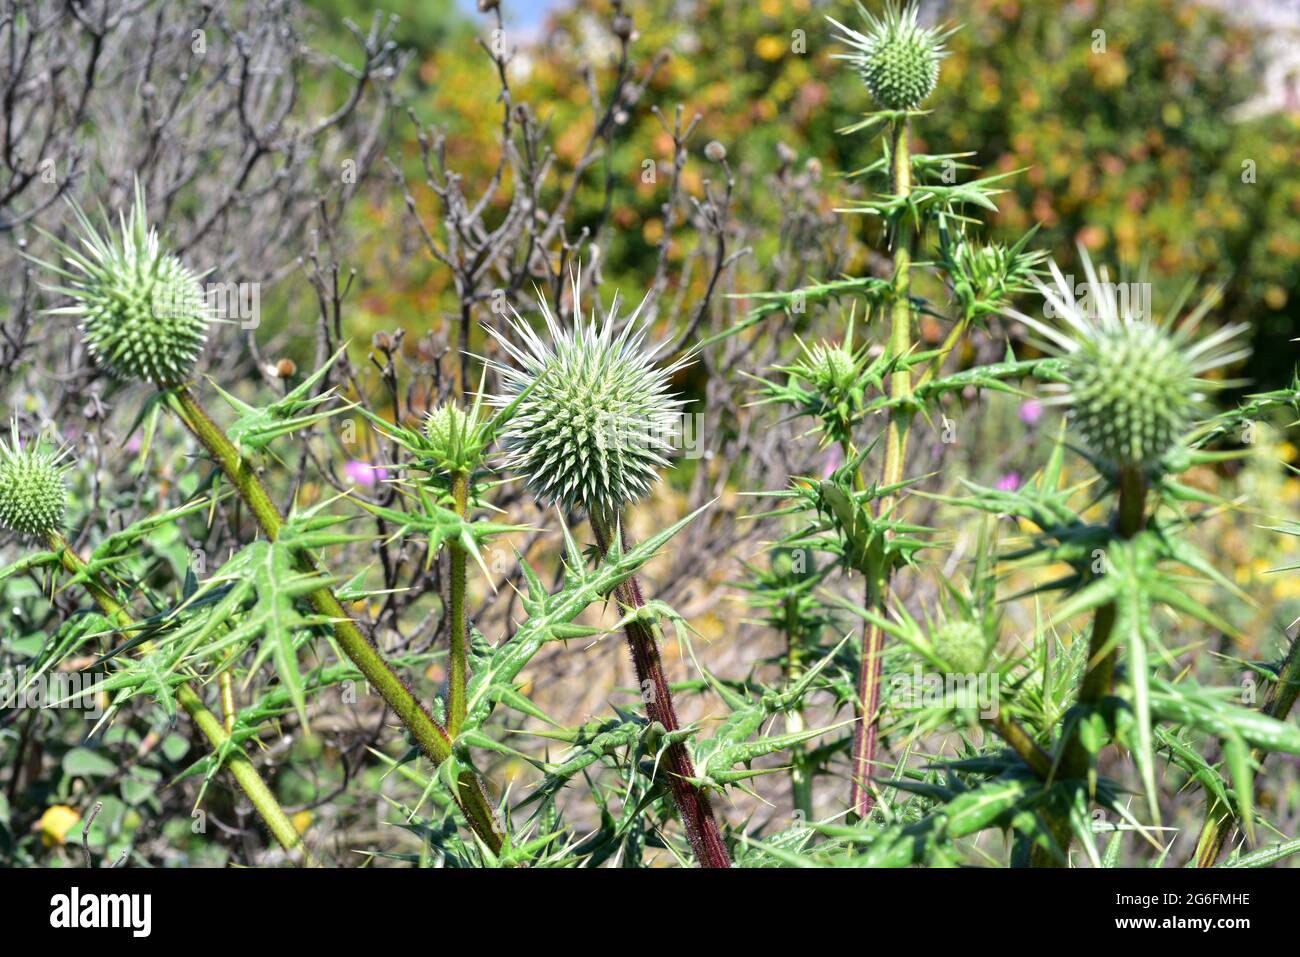 Echinops spinosissimus is a perennial plant native to southeastern Europe and northern Africa. Stock Photo